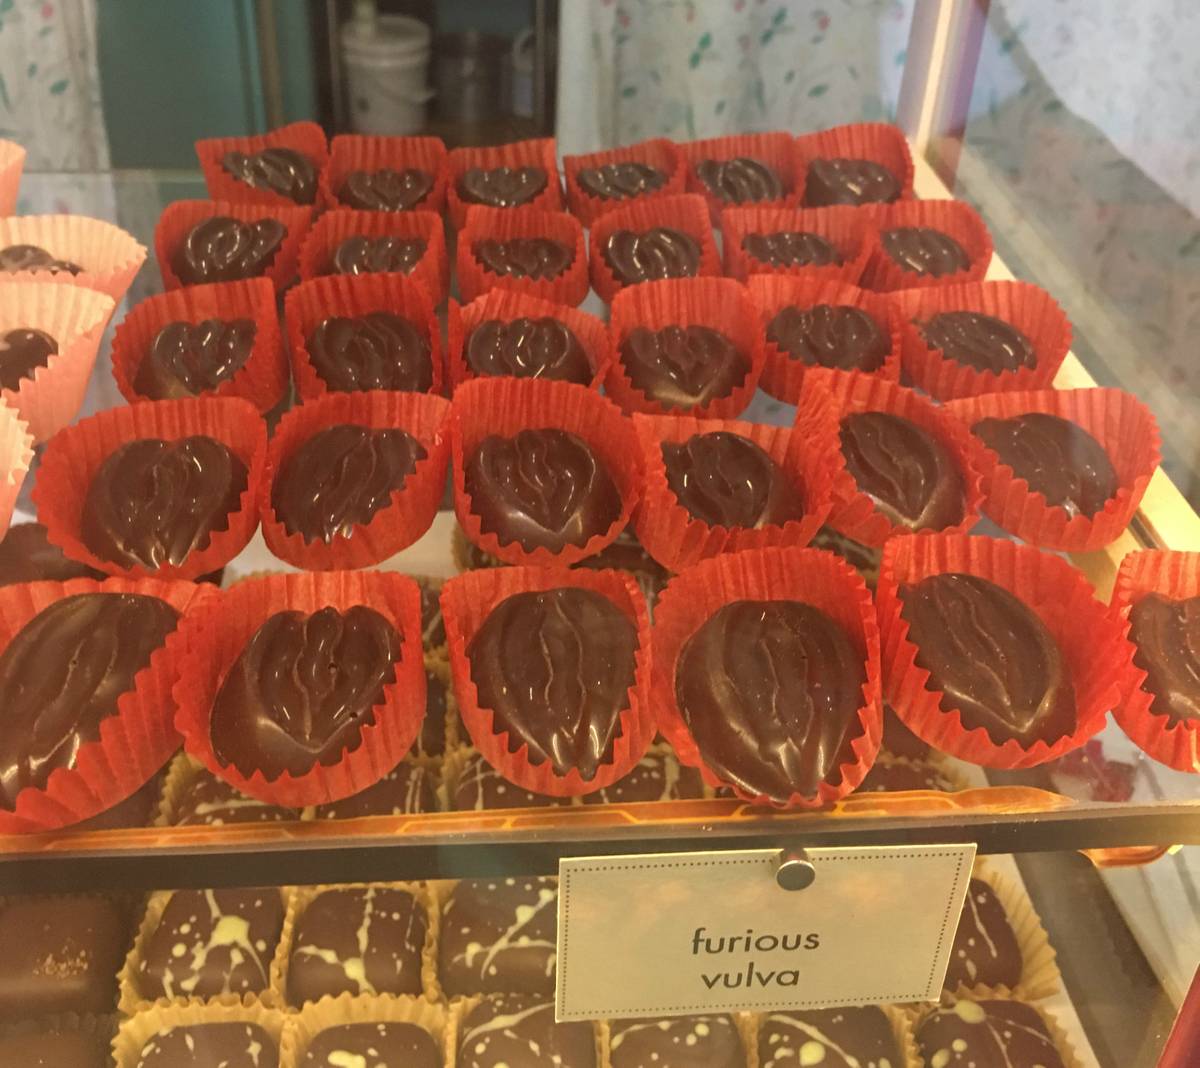 “Furious vulva” chocolates at Confectionery! (Courtesy of the author)